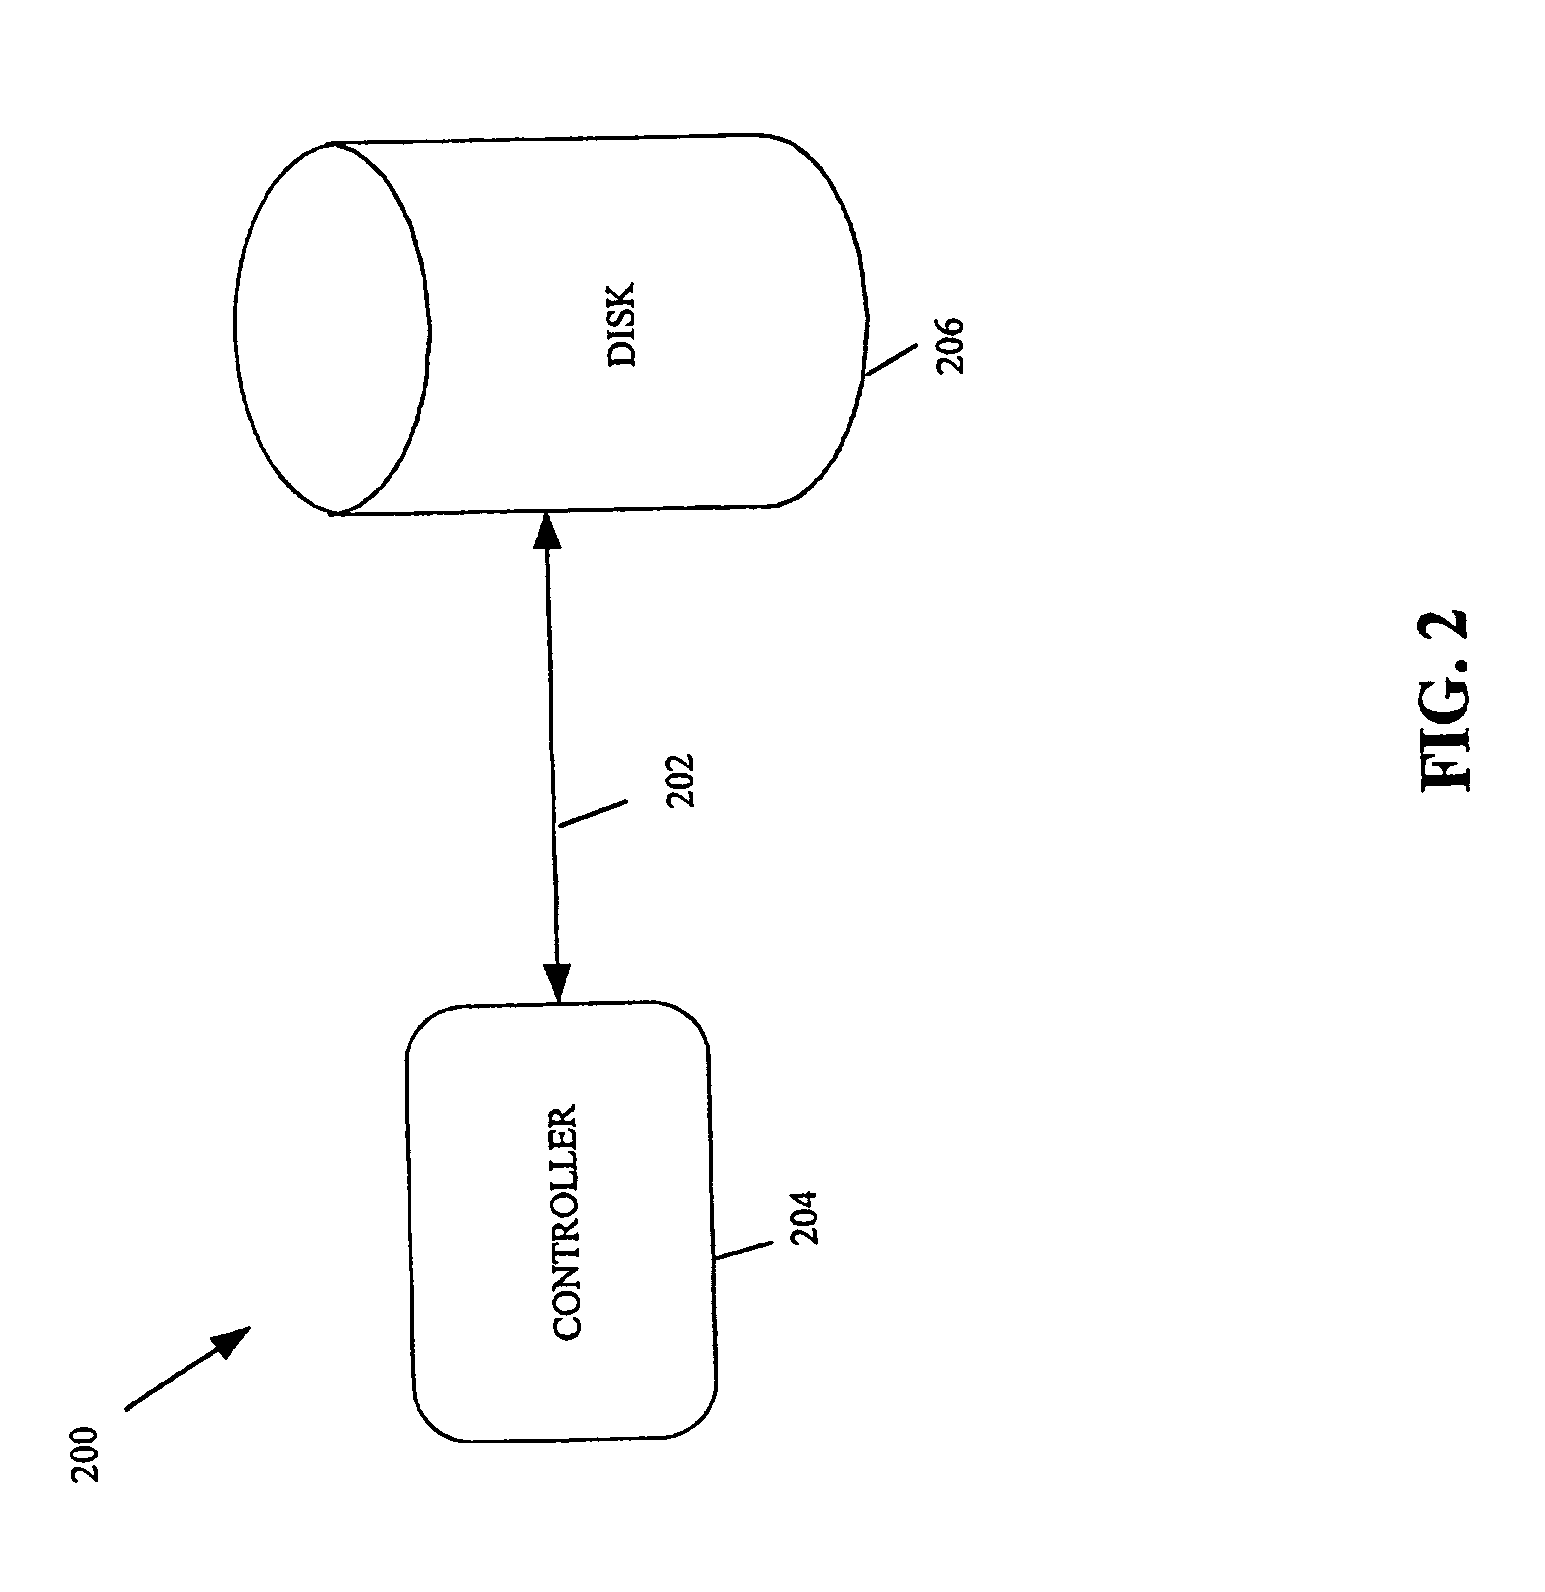 Integrated circuits for high speed adaptive compression and methods therefor